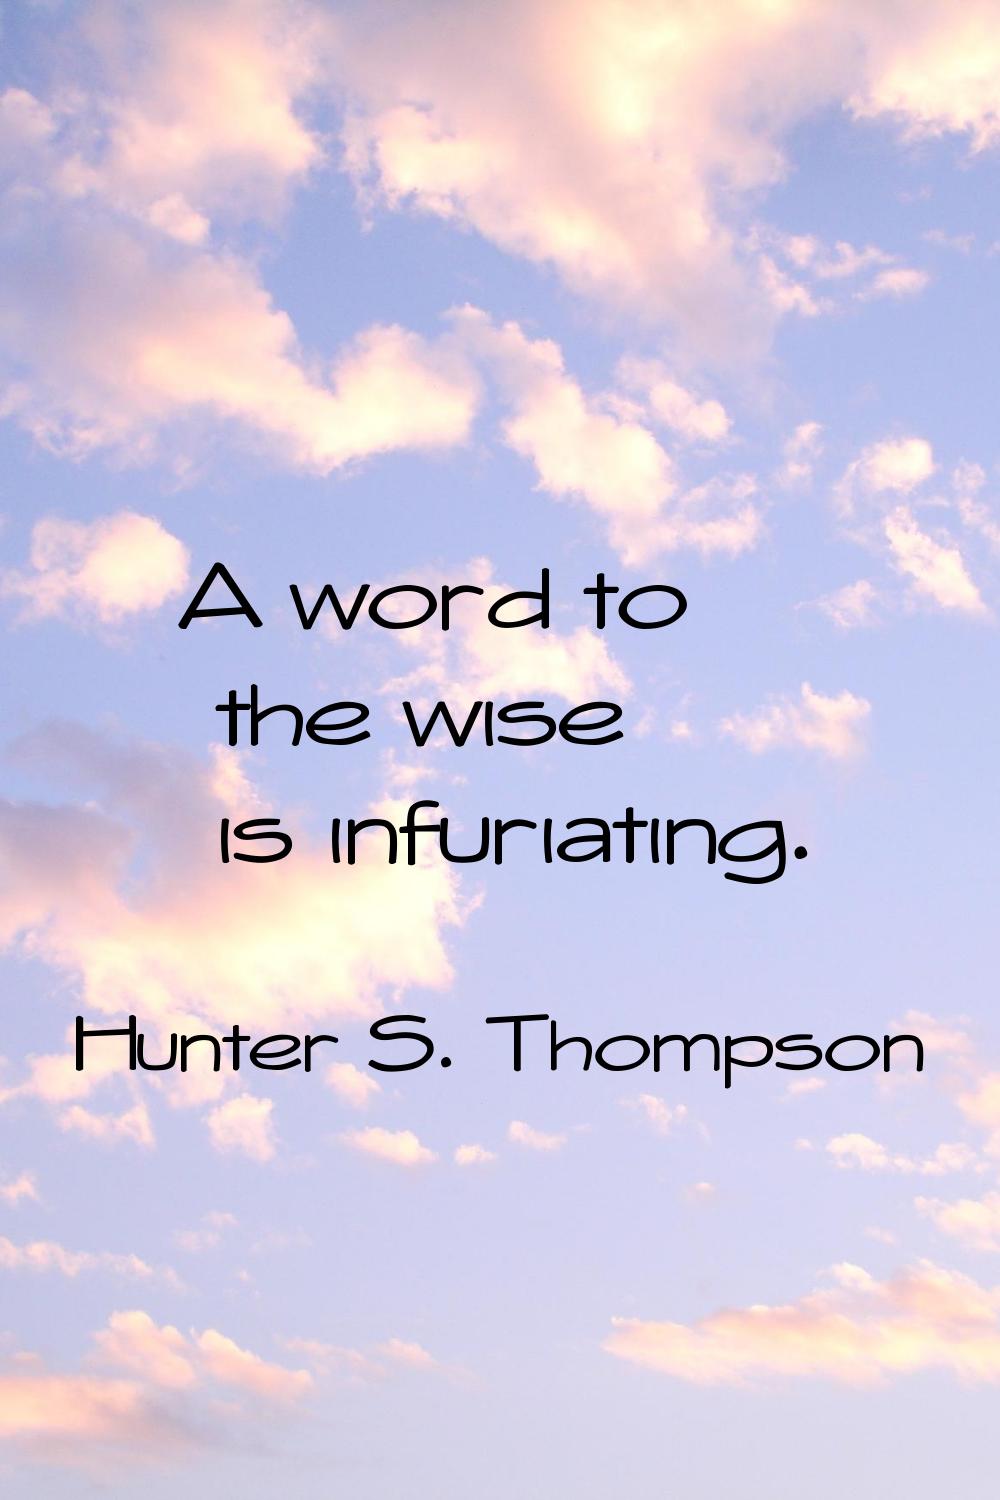 A word to the wise is infuriating.